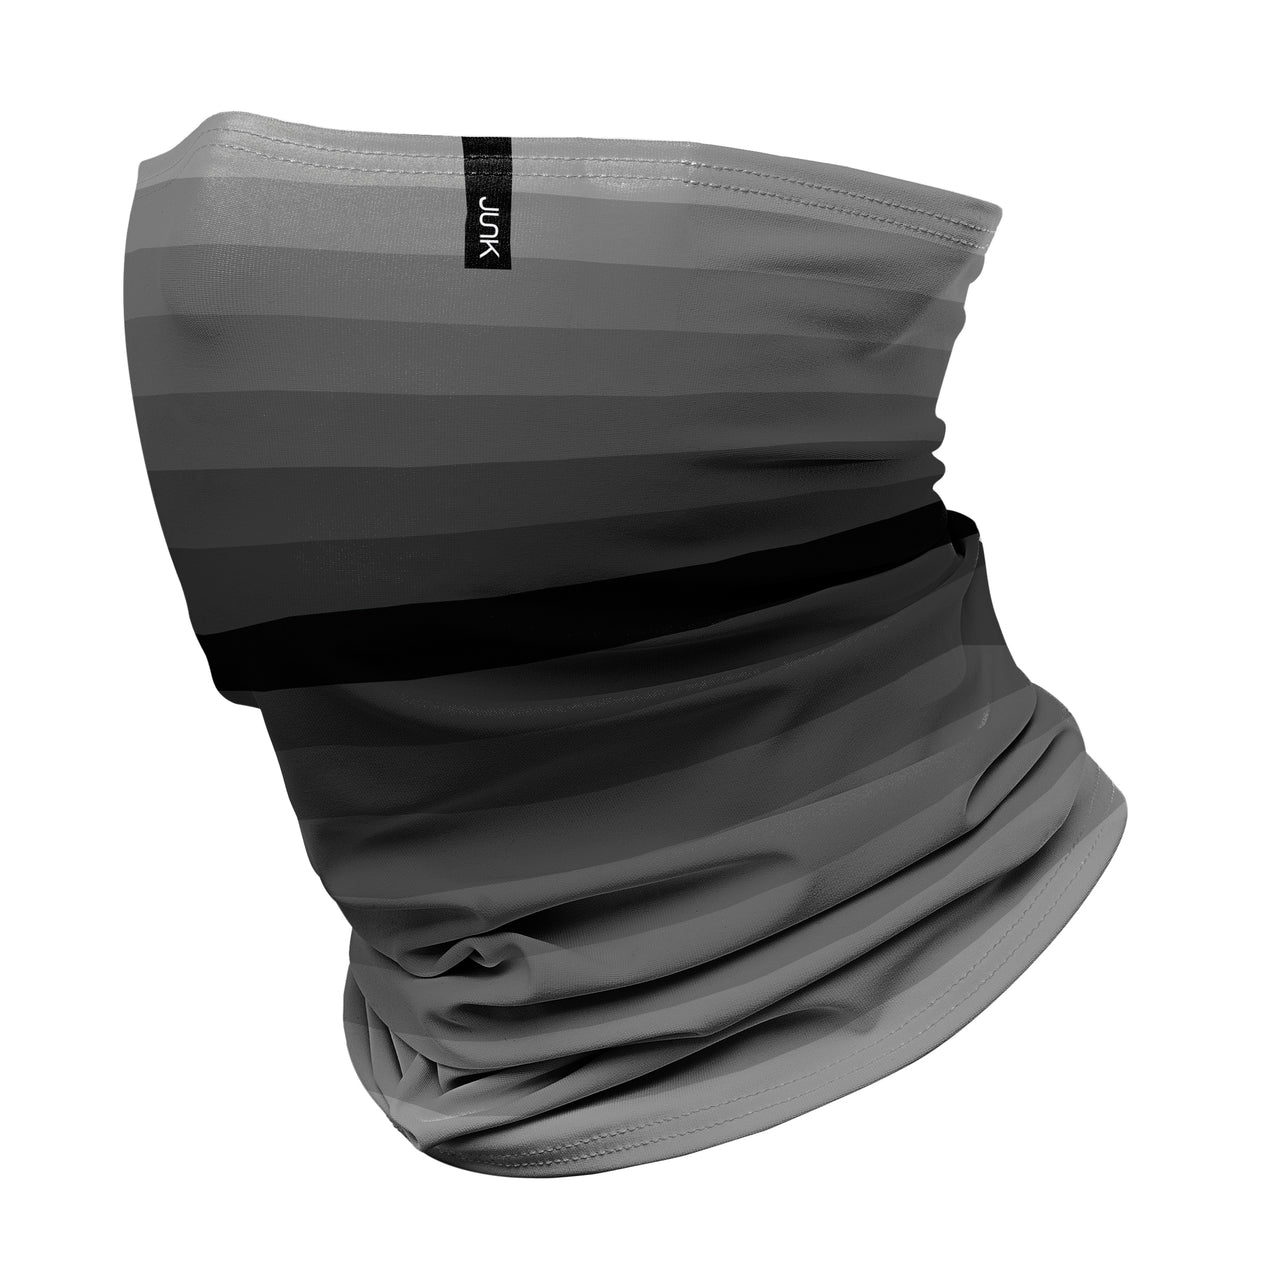 Grayscale Groves Winter Gaiter - View 1